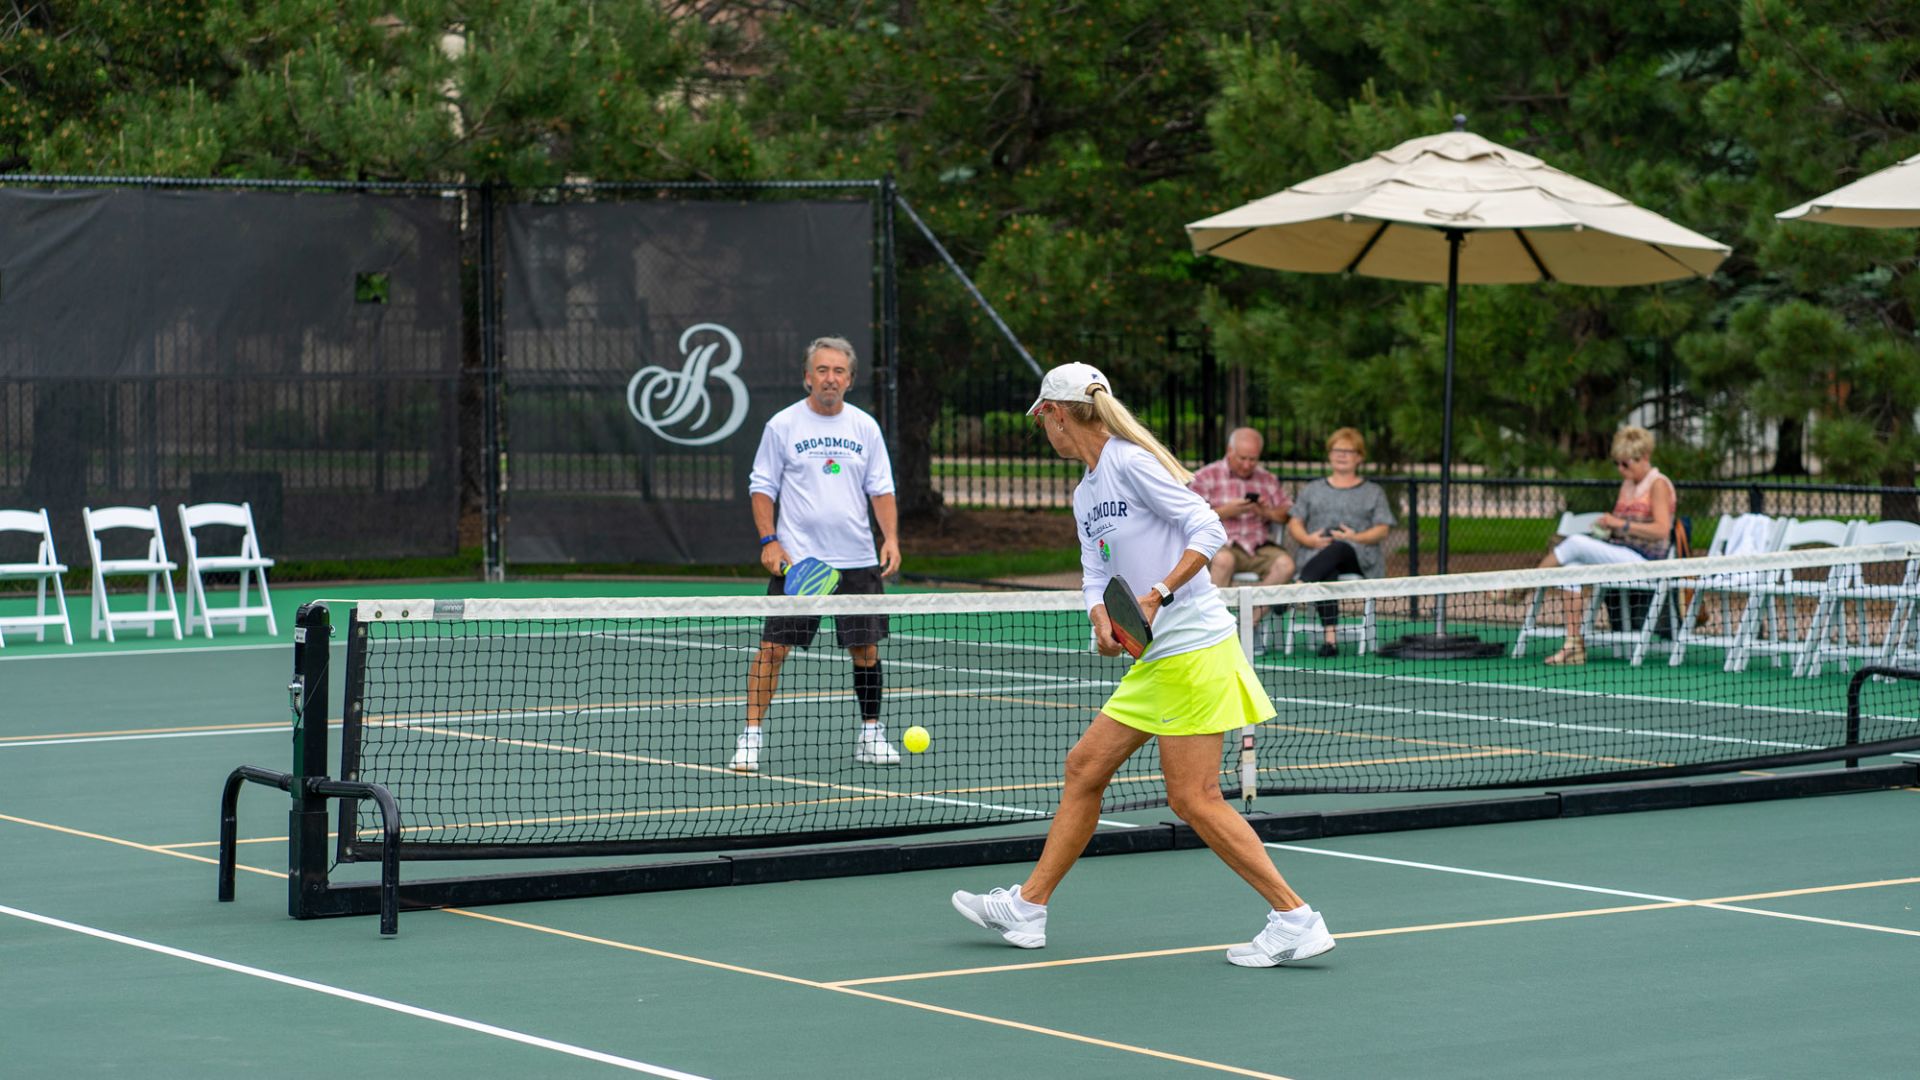 A Person Holding A Green Ball On A Court With A Racket